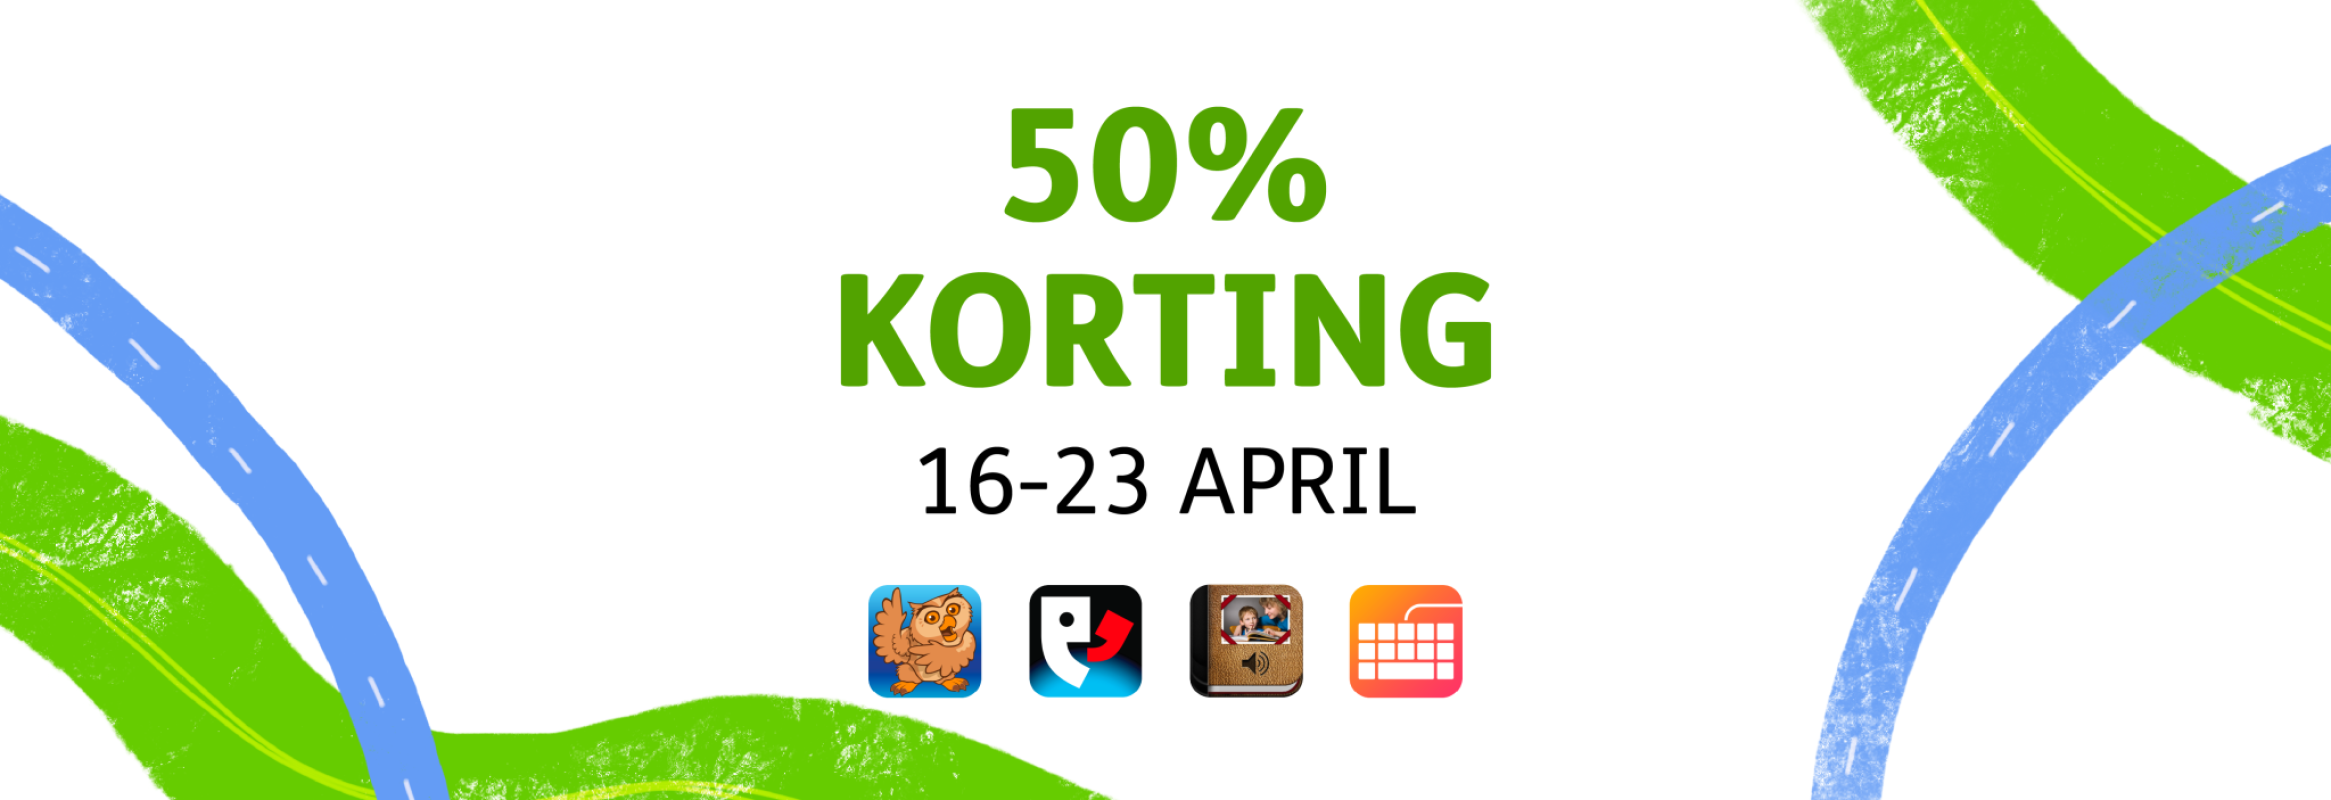 auto_awesome Translate from: Latin 82 / 5,000 Translation results Translation result 50% korting, 16-23 april op Proloquo, Proloquo2Go, Proloquo4Text, Pictello en Keeble